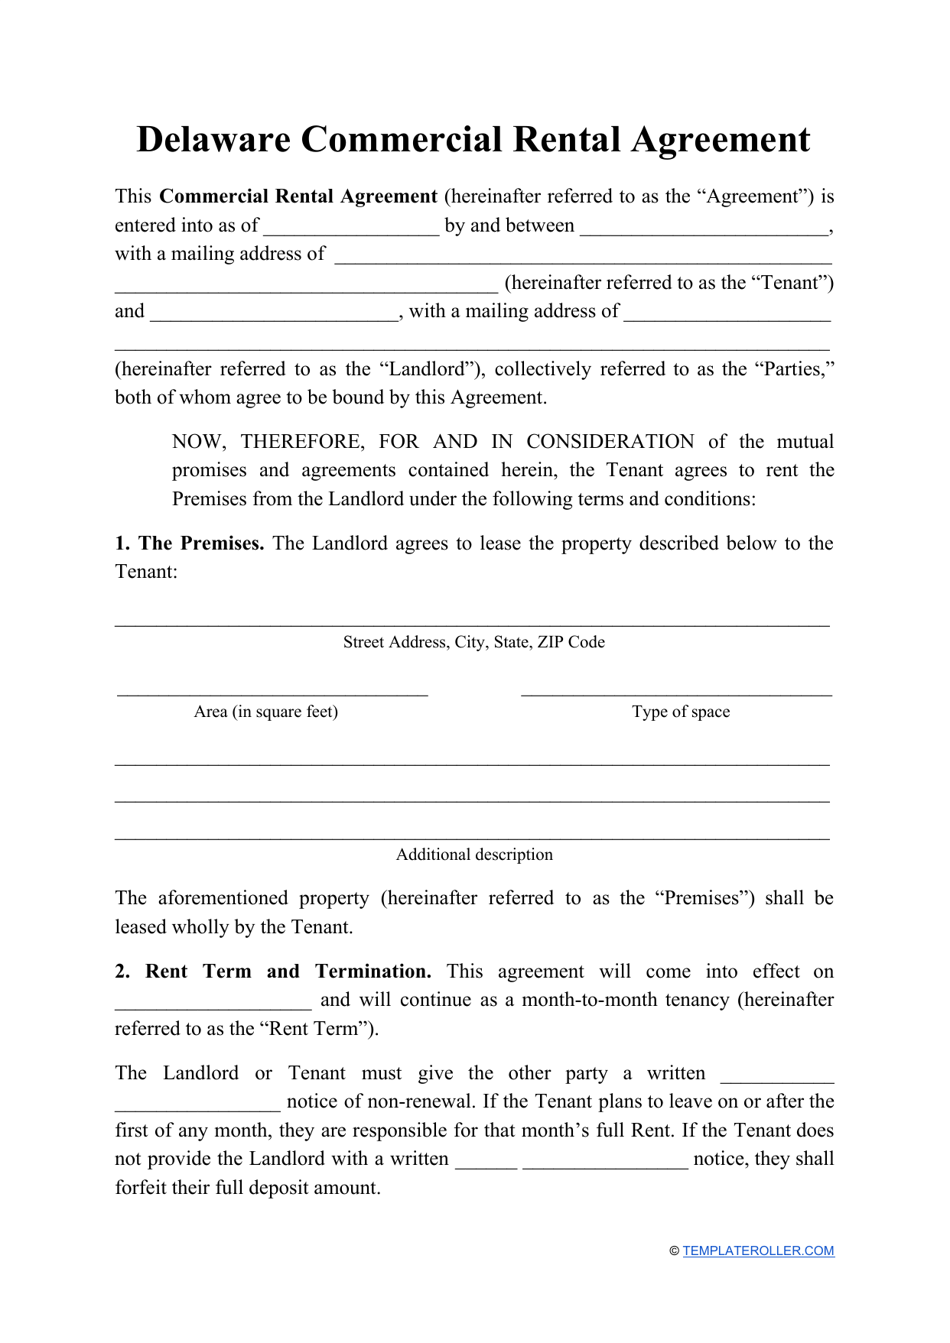 Commercial Rental Agreement Template - Delaware, Page 1